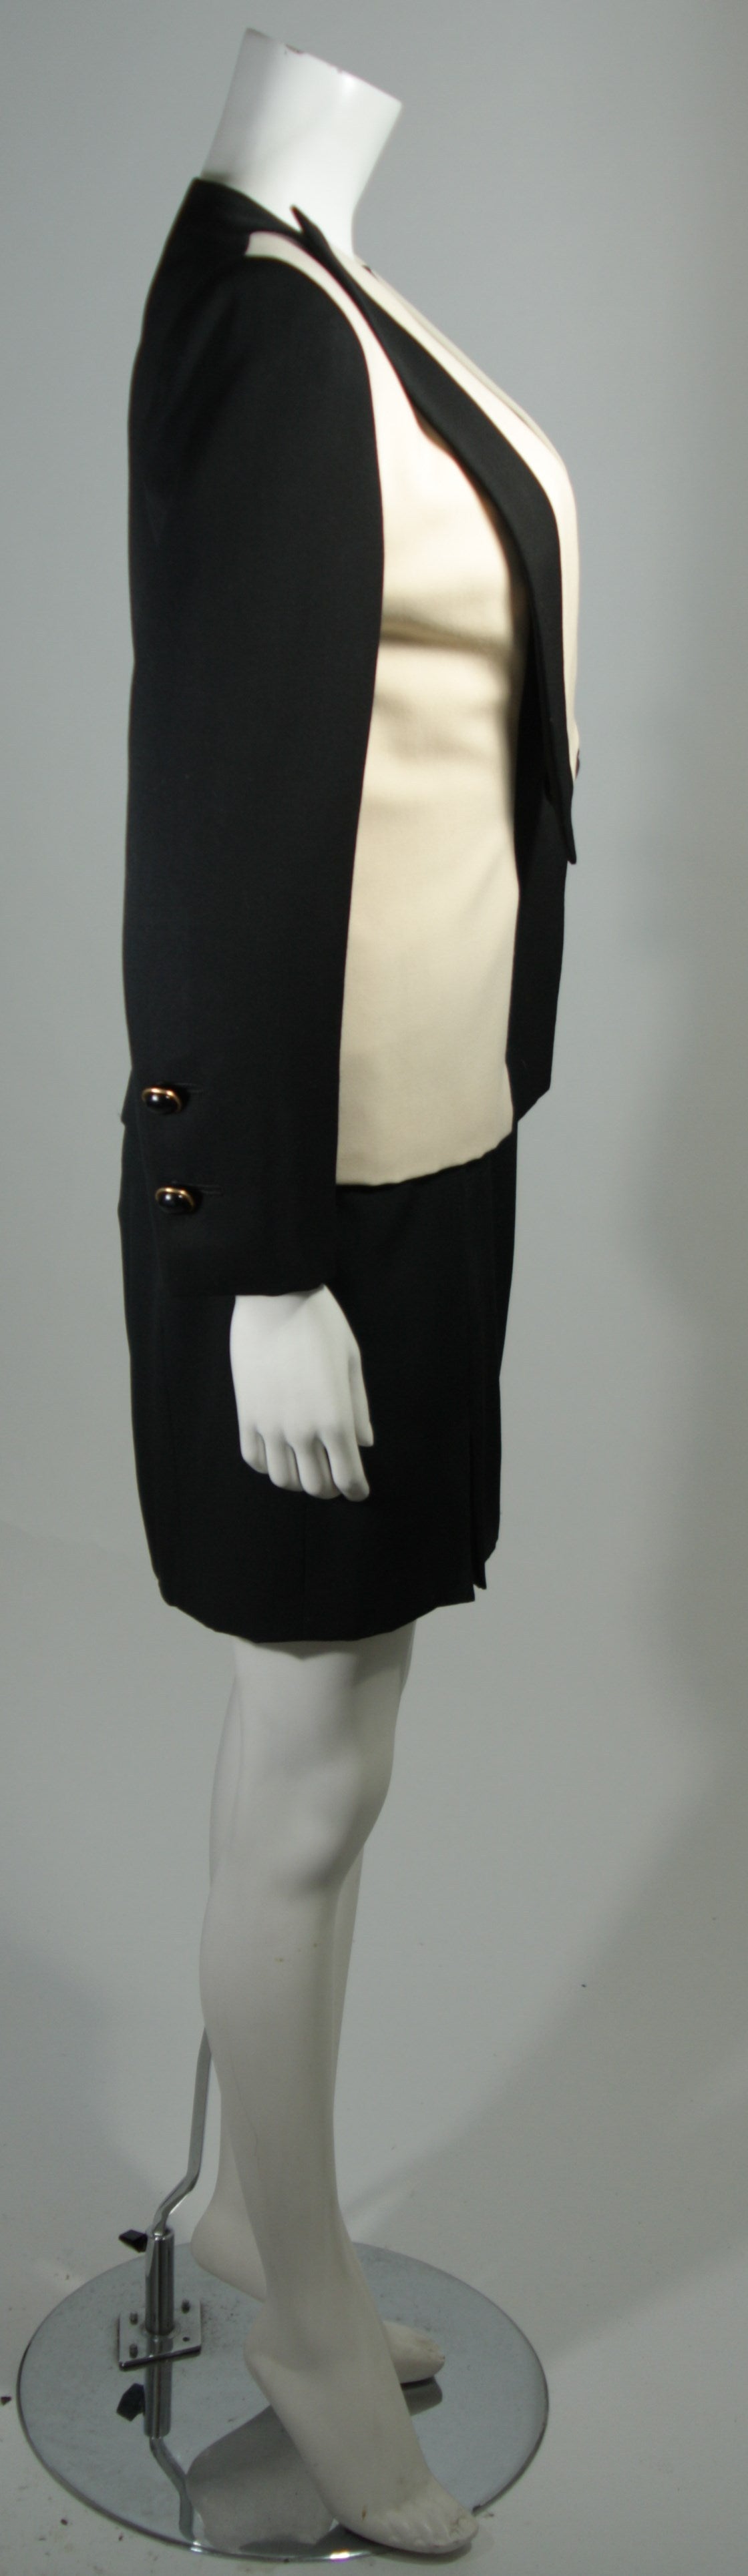 Galanos Couture Black and Off White Contrast Dress Suit Ensemble Size 4 6 2